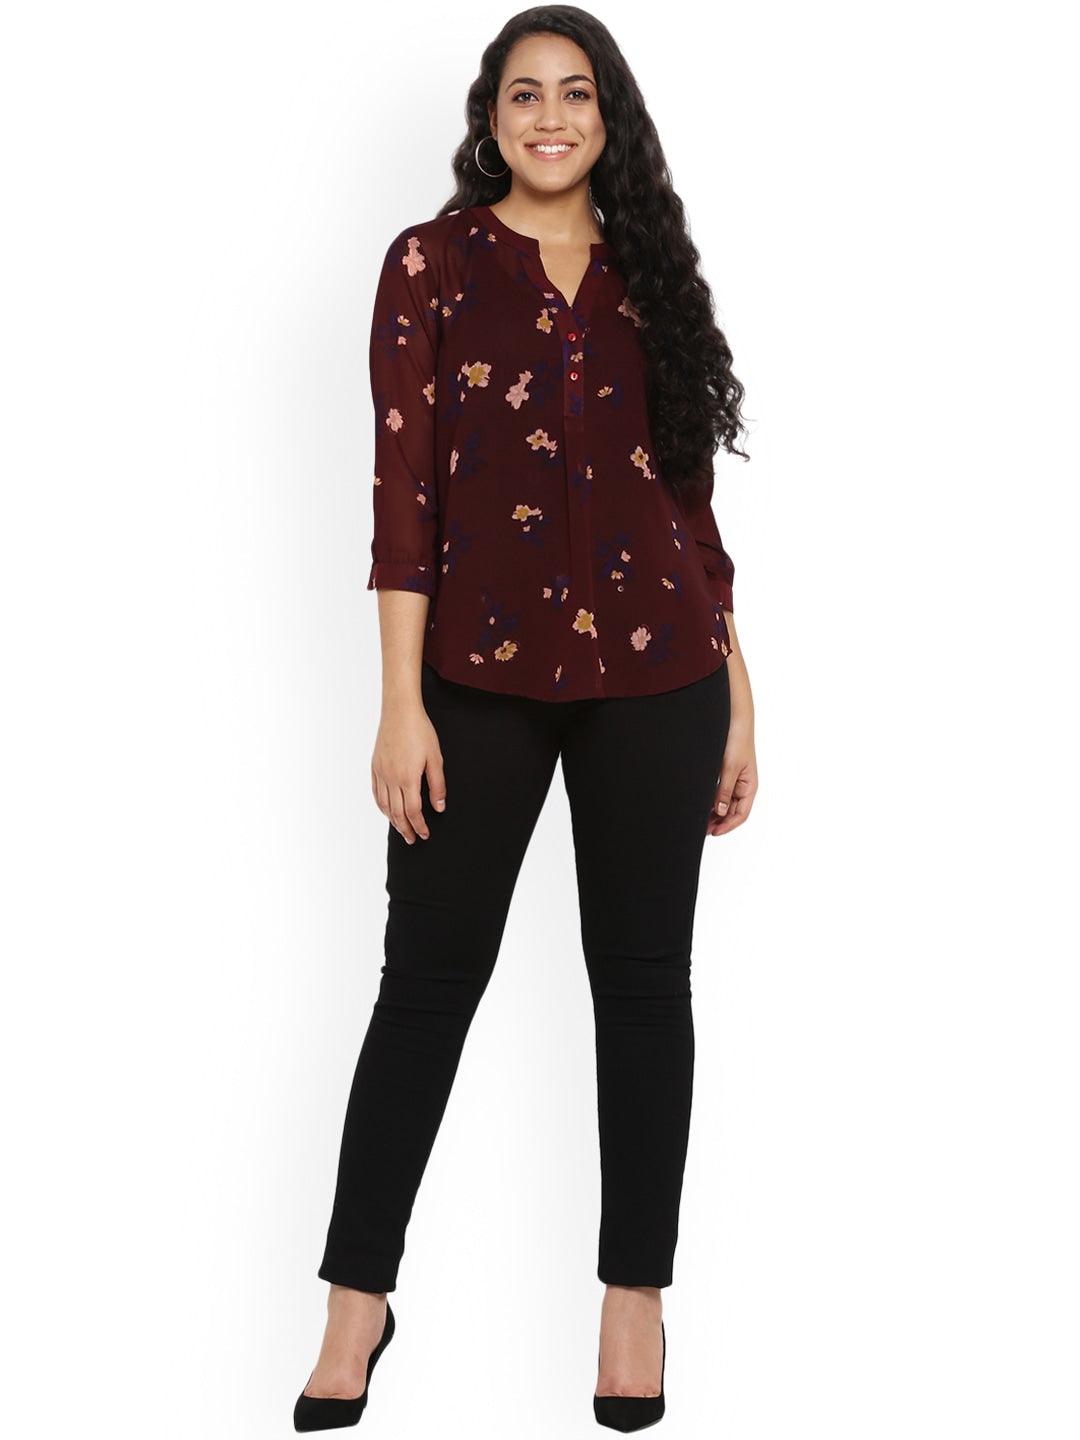 Qurvii Maroon Floral Double Shaded Half Placket Tunic - Qurvii India